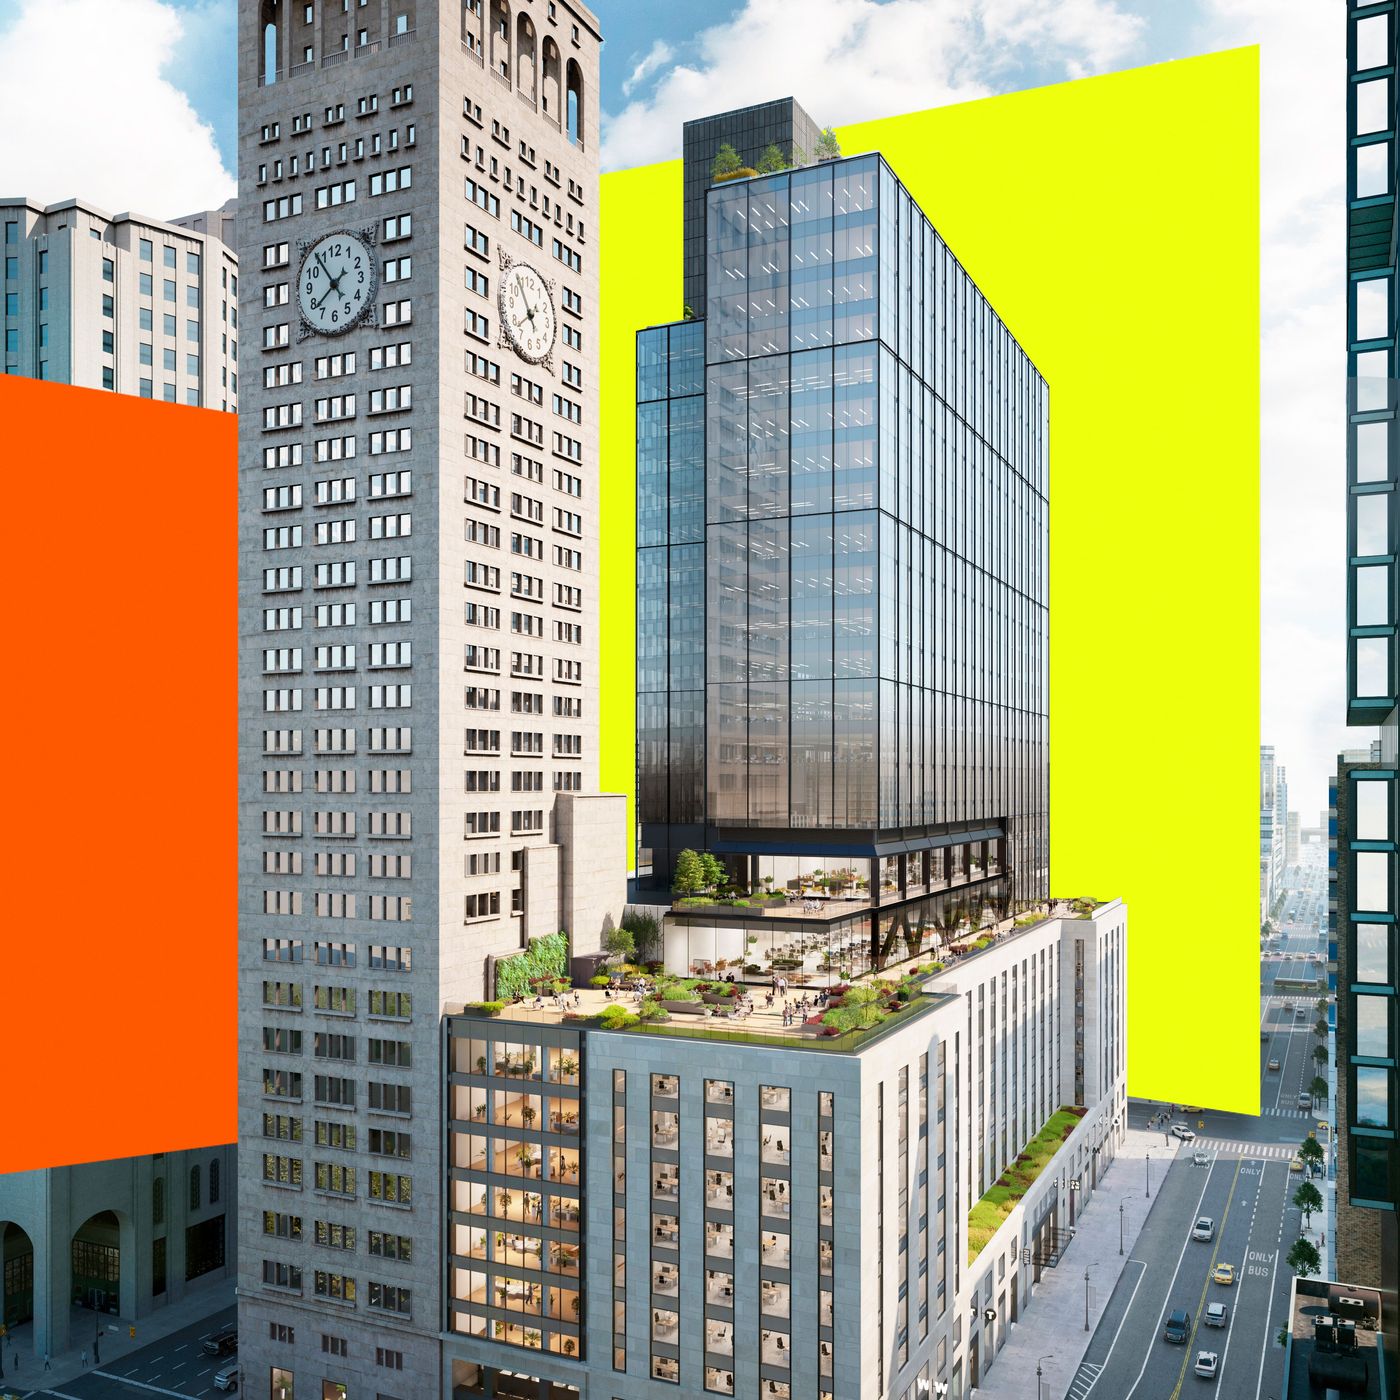 Nomad's One Madison Avenue is getting an 18-floor addition